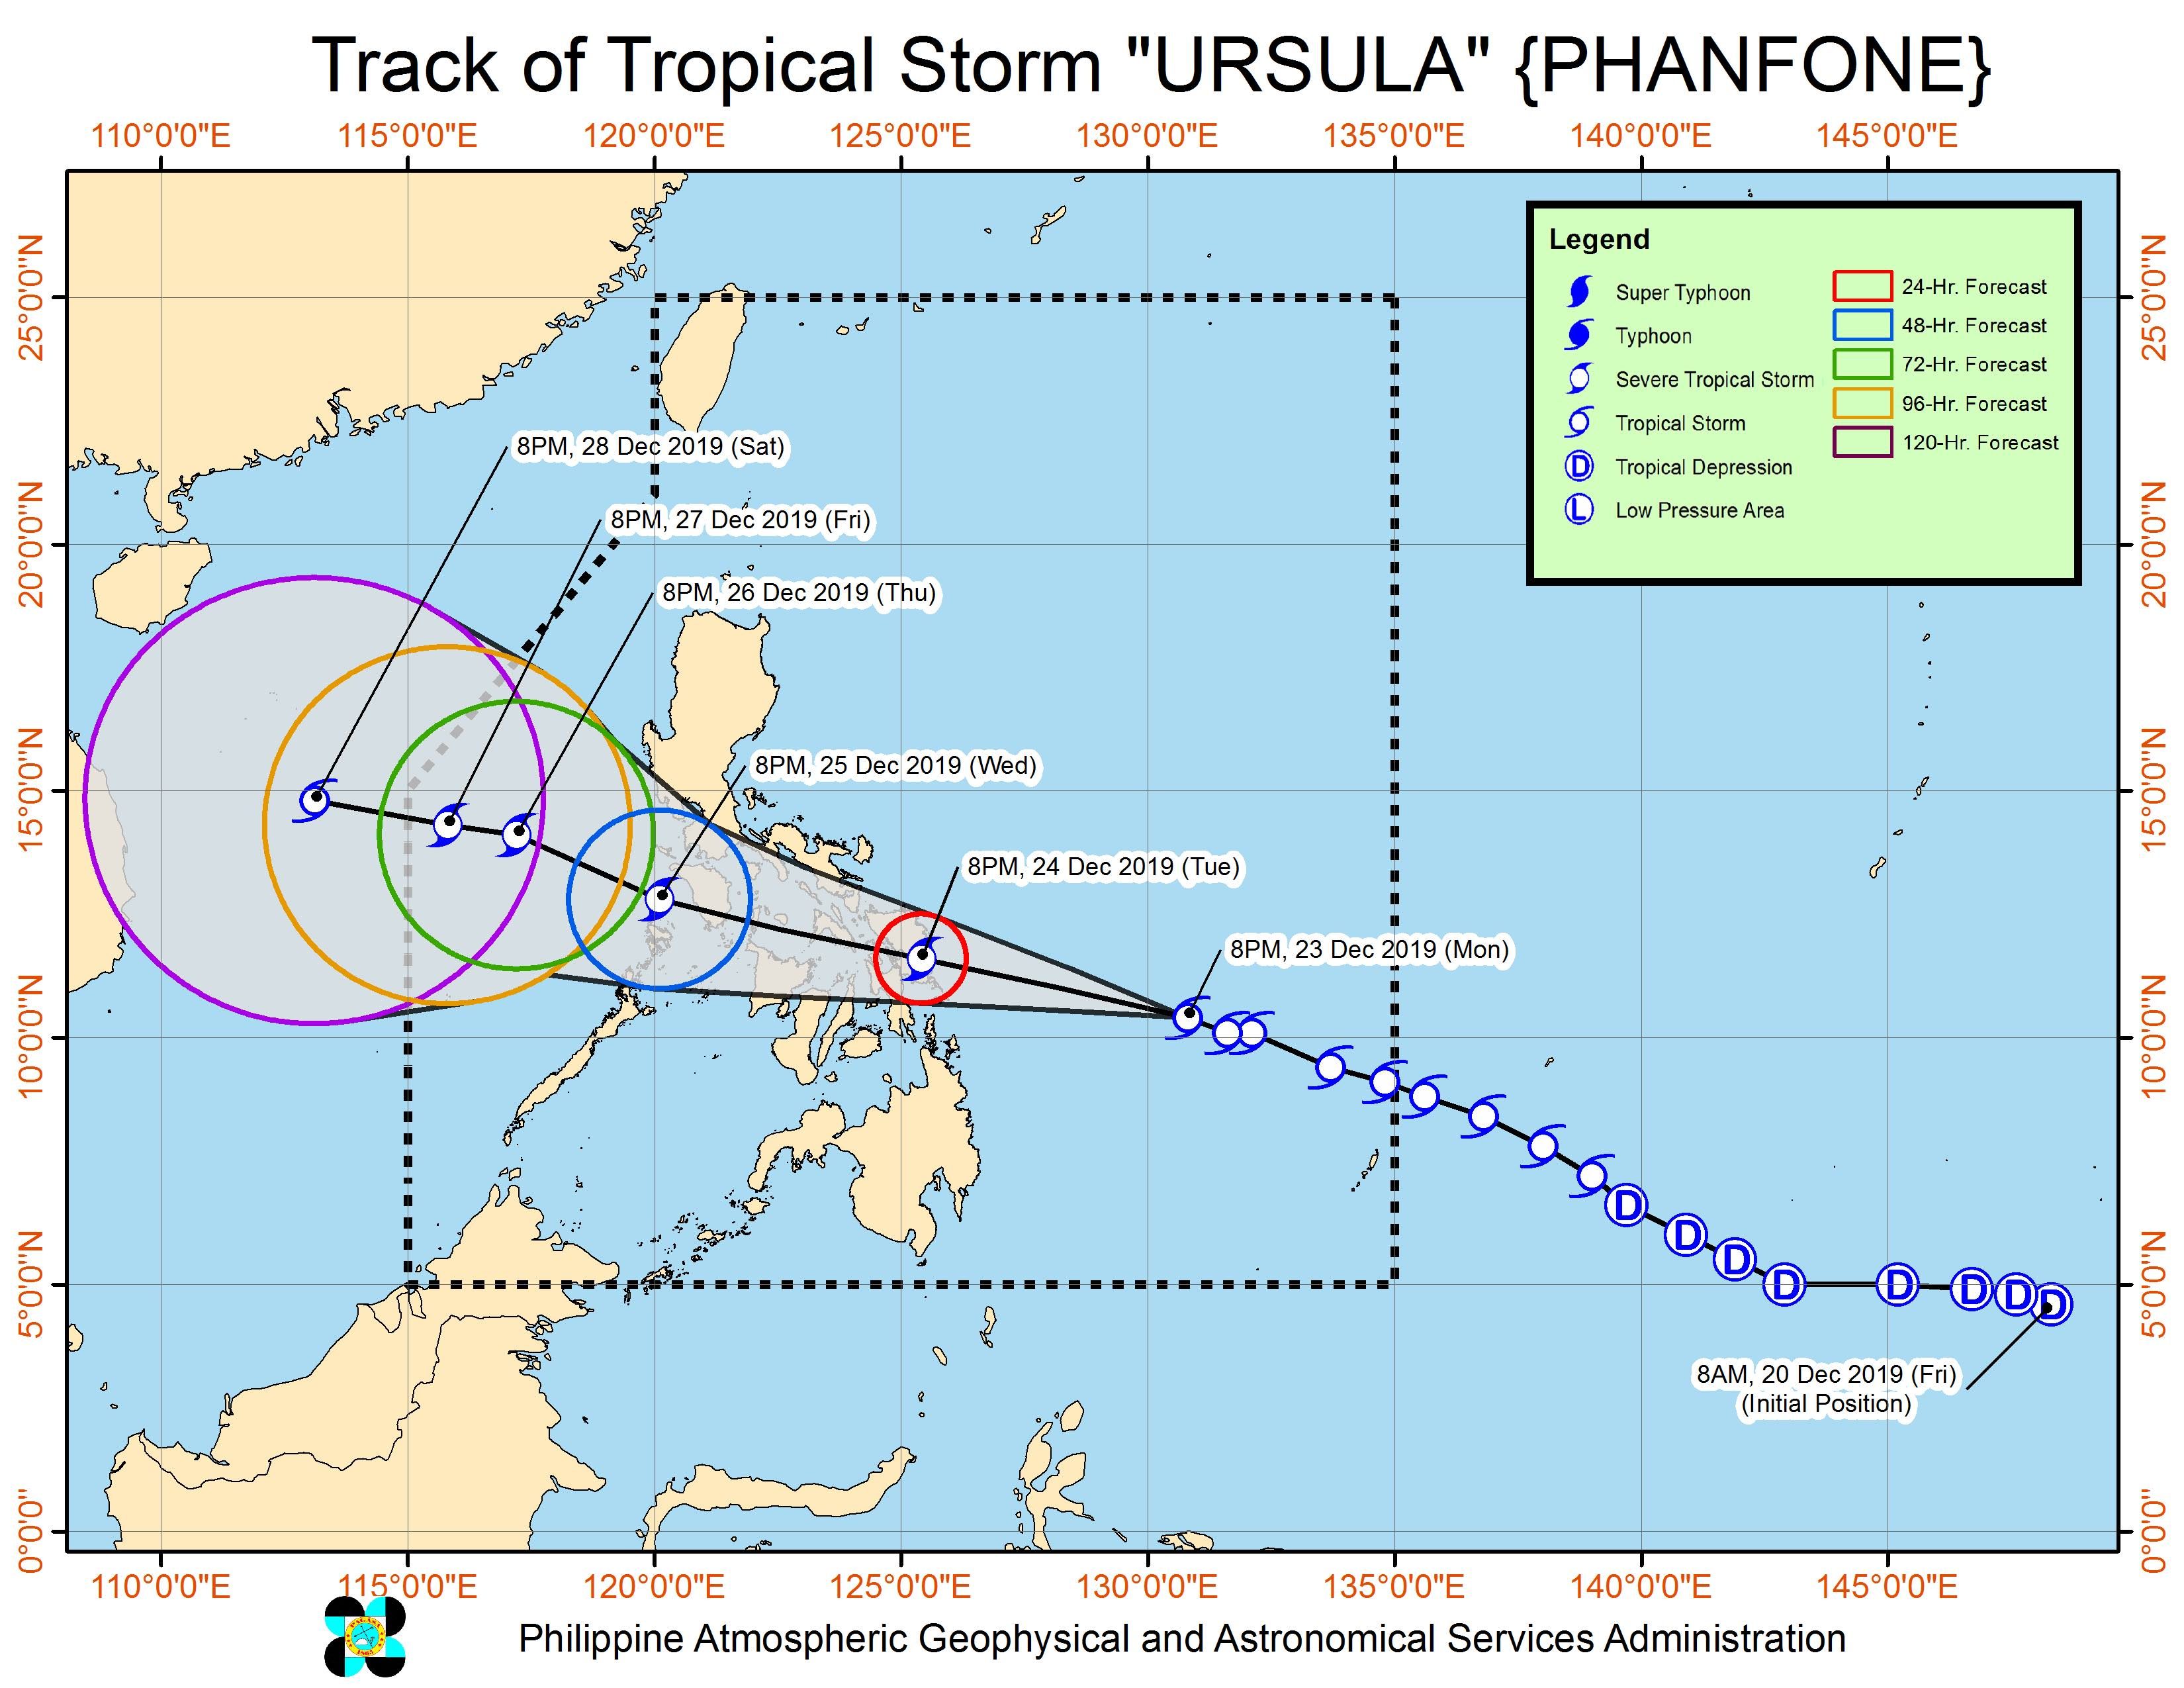 Forecast track of Tropical Storm Ursula (Phanfone) as of December 23, 2019, 11 pm. Image from PAGASA 